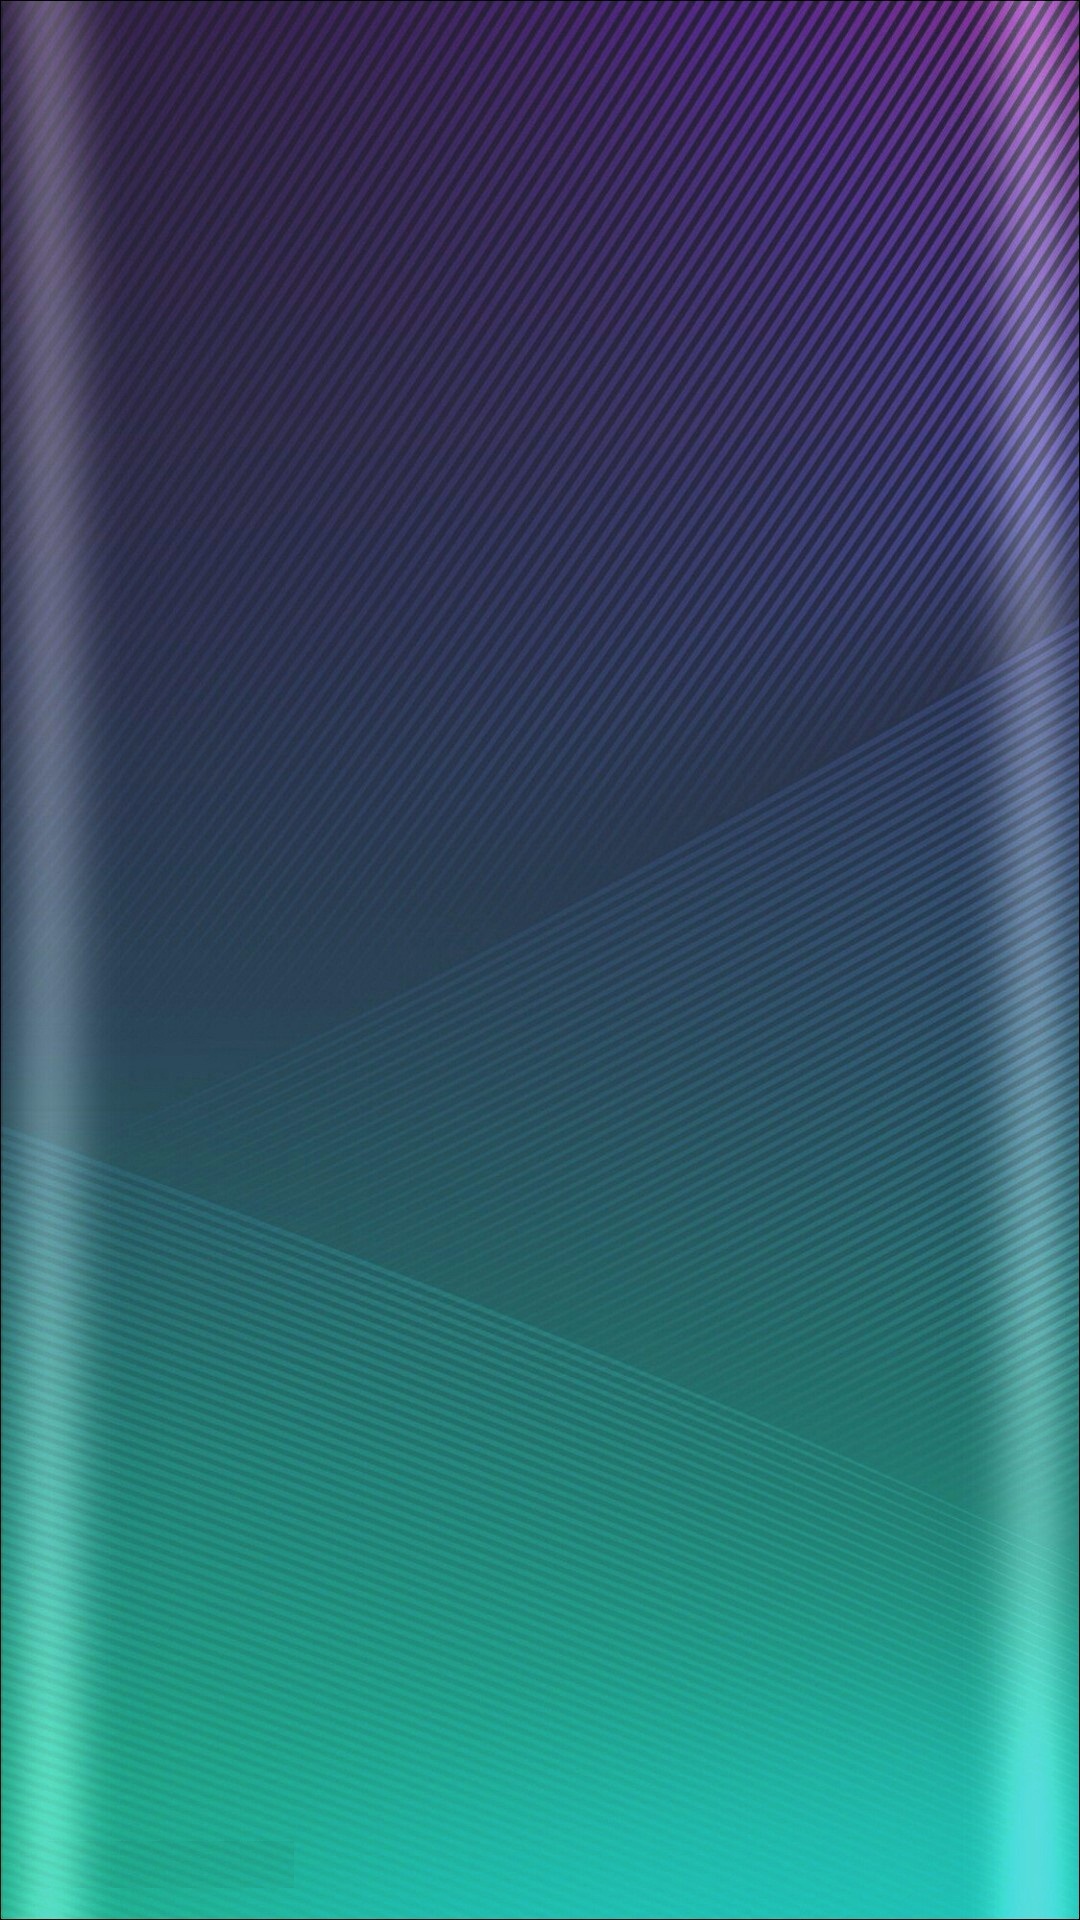 Teal Color Wallpaper Android with resolution 1080X1920 pixel. You can make this wallpaper for your Android backgrounds, Tablet, Smartphones Screensavers and Mobile Phone Lock Screen